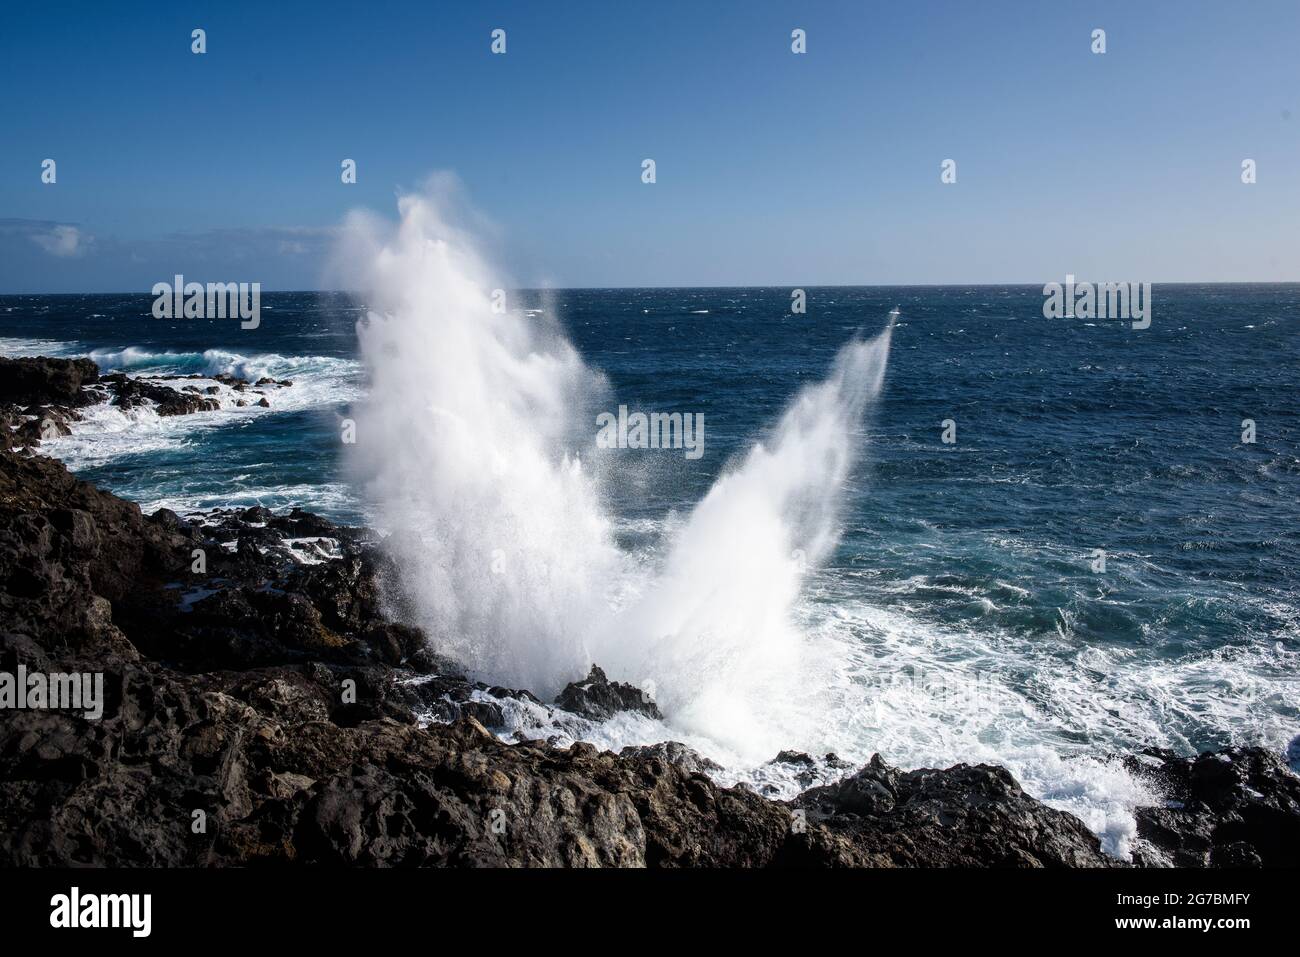 Le Souffleur or a Natural Geyser at Reunion Island Stock Image